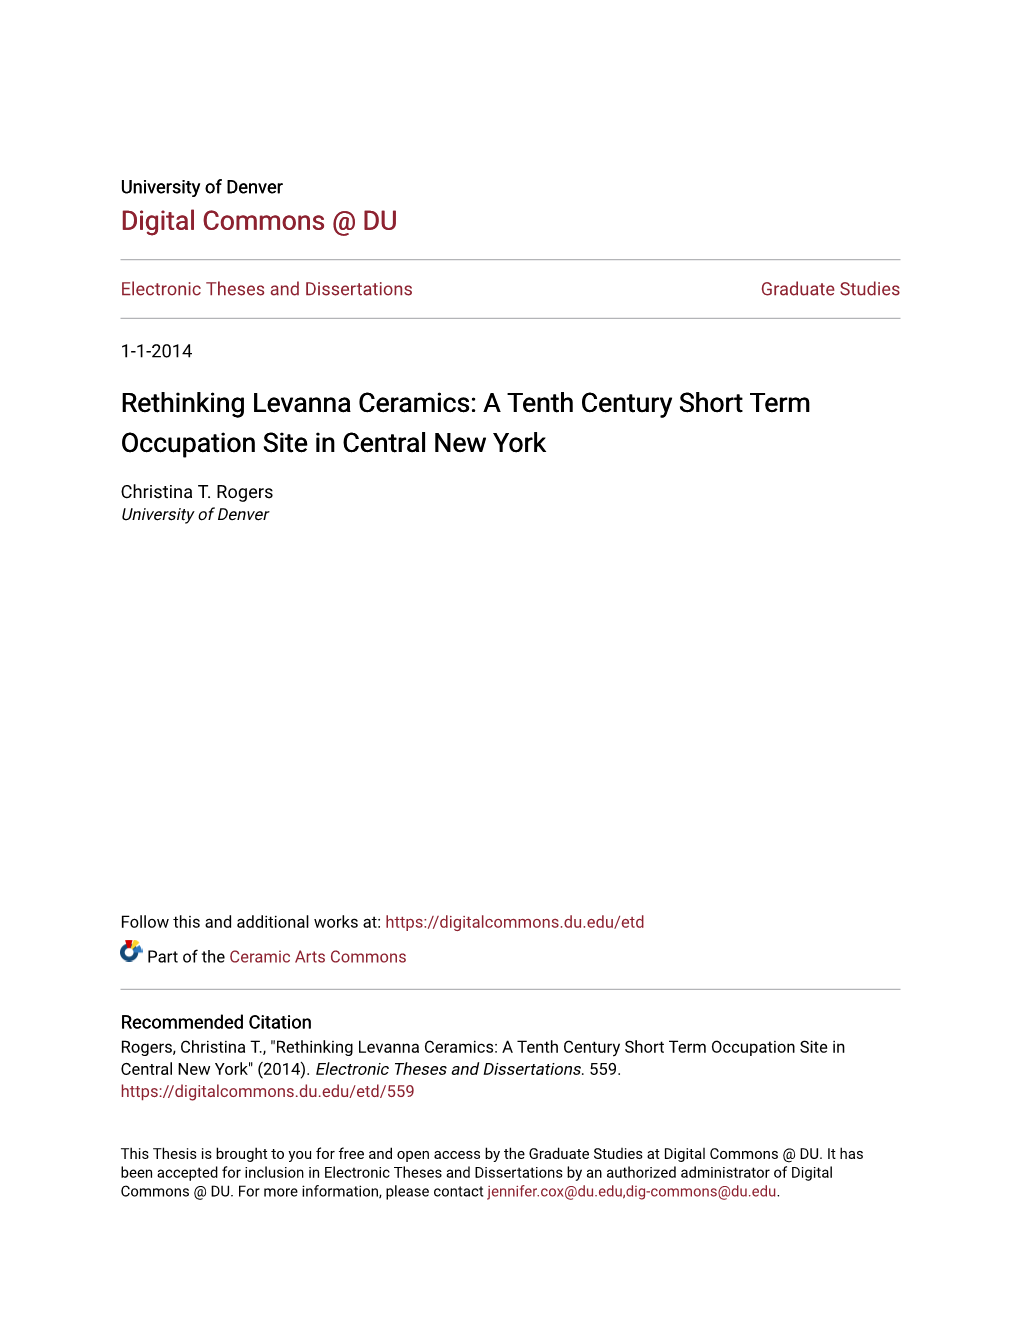 Rethinking Levanna Ceramics: a Tenth Century Short Term Occupation Site in Central New York